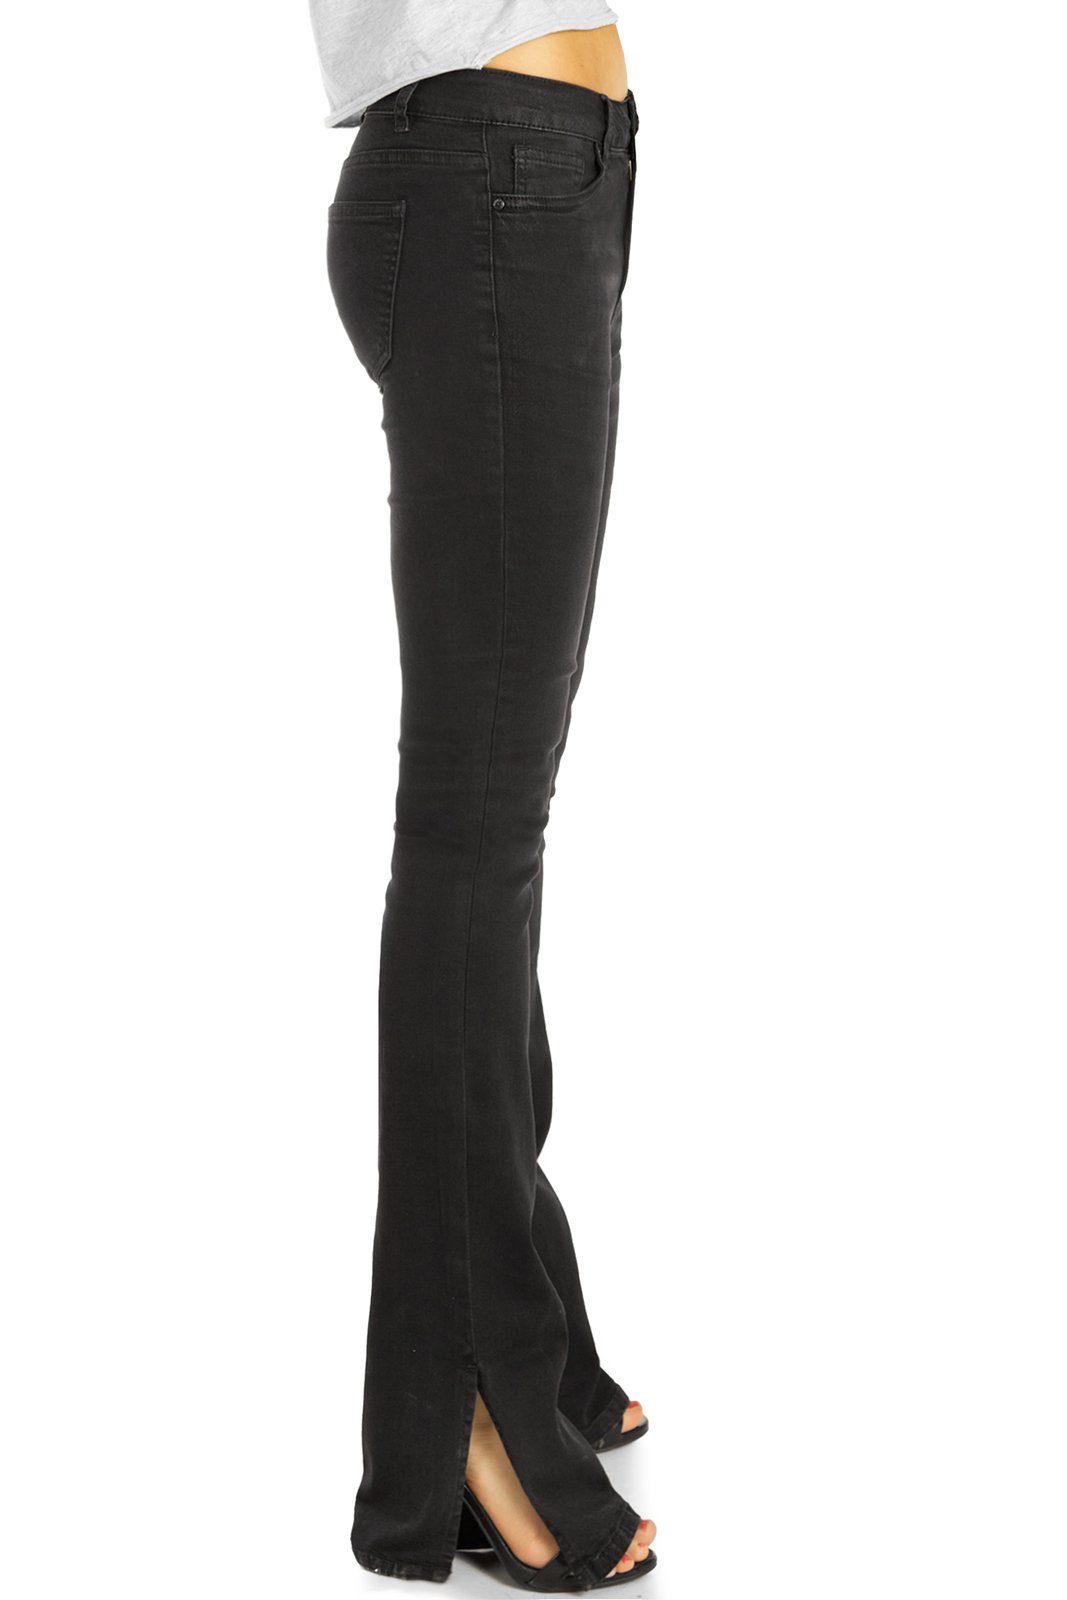 be Hose mit Jeans 5-Pocket-Style Damen - Stretch-Anteil, j27r styled Bootcut-Jeans cut waist mid out - Bootcut mit